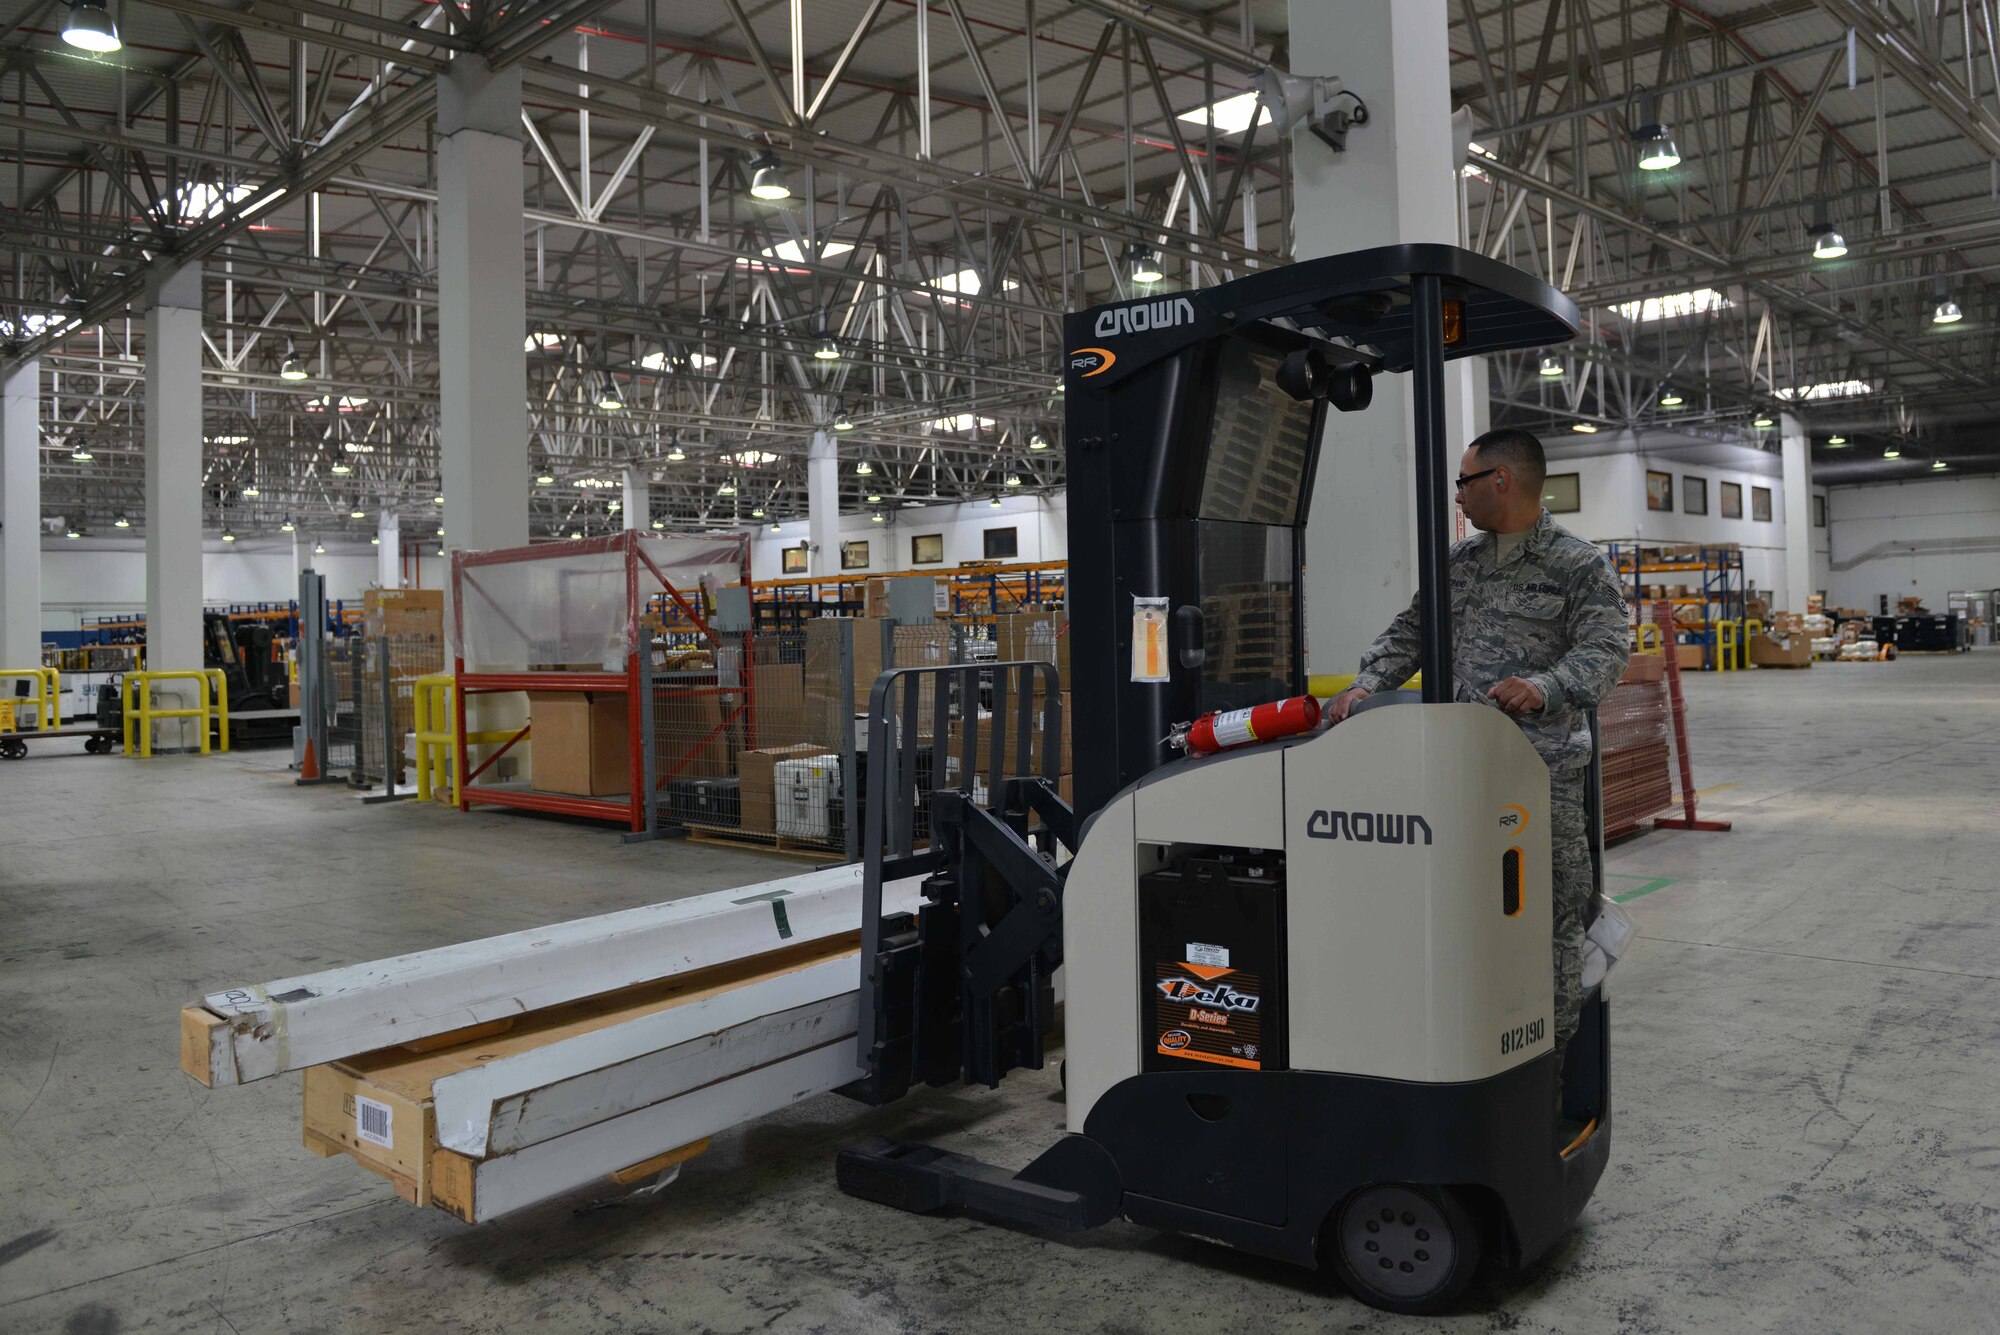 U.S. Air Force Staff Sgt. Ray Medrano, 39th Logistics Readiness Squadron central storage NCO in charge, moves cargo with a forklift in the supply warehouse Oct. 4, 2016, at Incirlik Air Base, Turkey. Supply Airmen maintain and provide necessary equipment and supplies for Air Force operations. (U.S. Air Force photo by Senior Airman John Nieves Camacho)